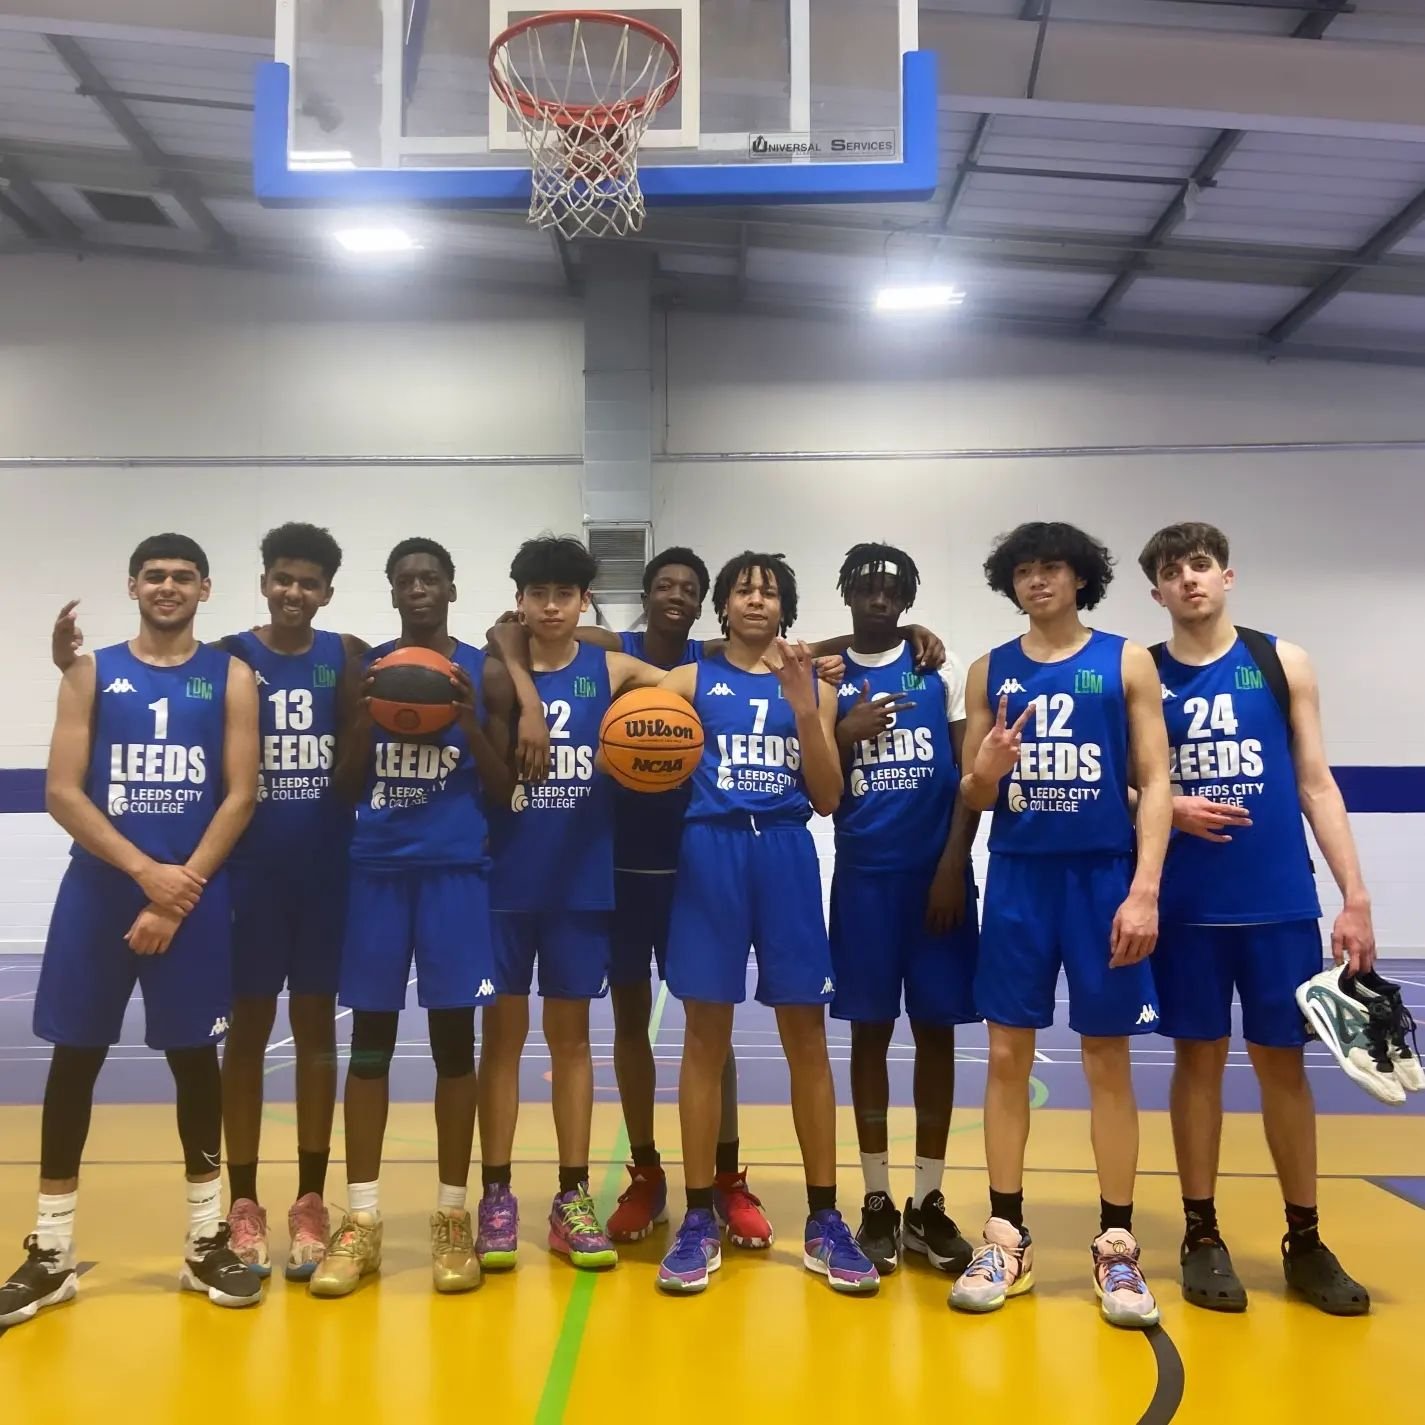 In one of the games of the season U16 I overcame a resilient @qebasketball after a final second basket from @showtimeash5 ‼️🏀 The boys look good for another strong finish in the @nblengland North 🏀

Final score 66 - 67  #W

#aspireforgreatness 

#l